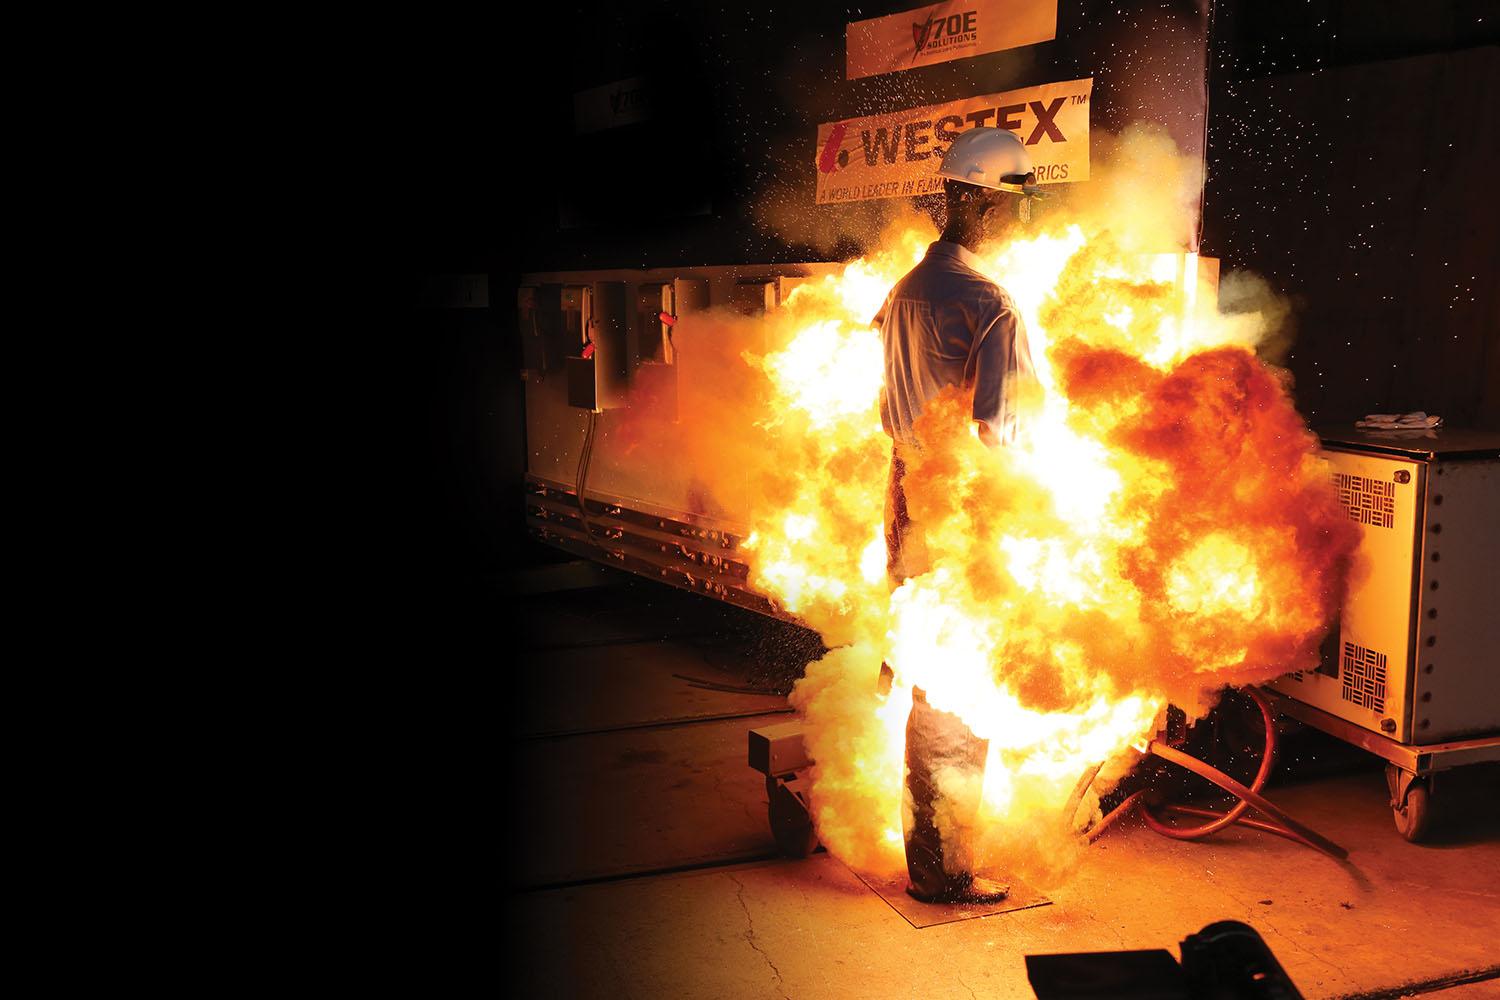 Westex conducts electric arc flash simulation to display protective fabric.